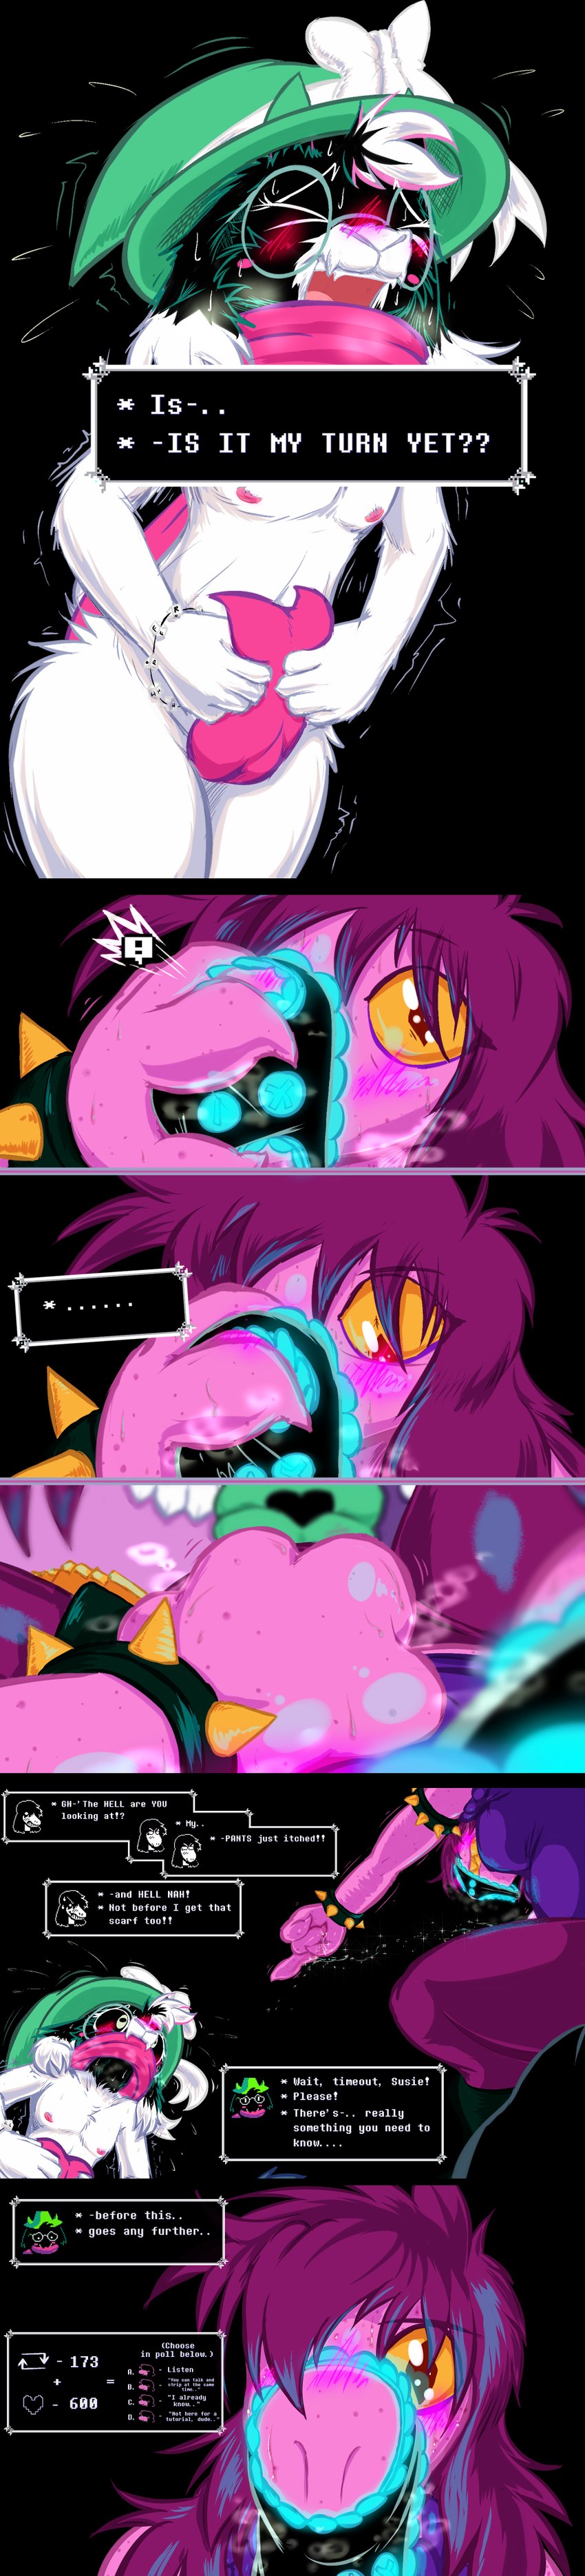 ralsei and susie (undertale (series) and etc) created by frist44